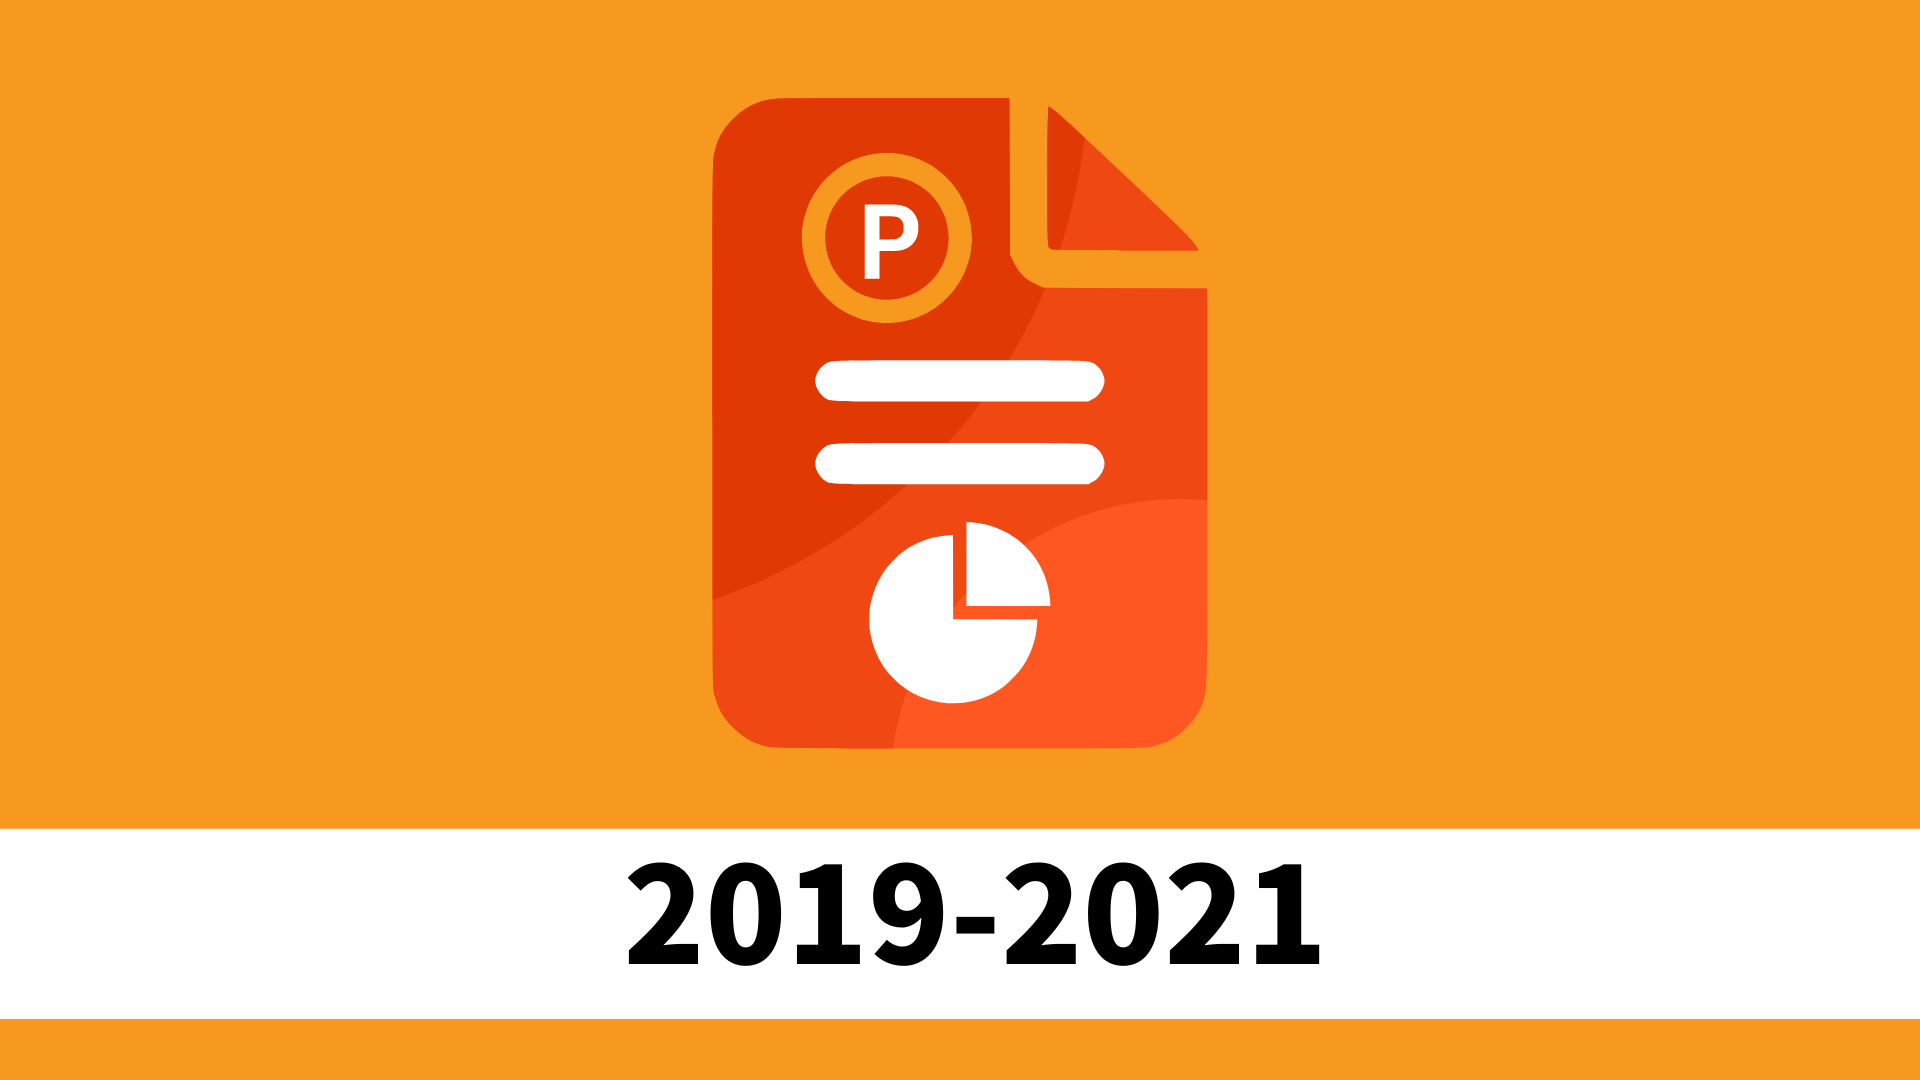 PowerPoint 2019-2021 Learning（入門編）